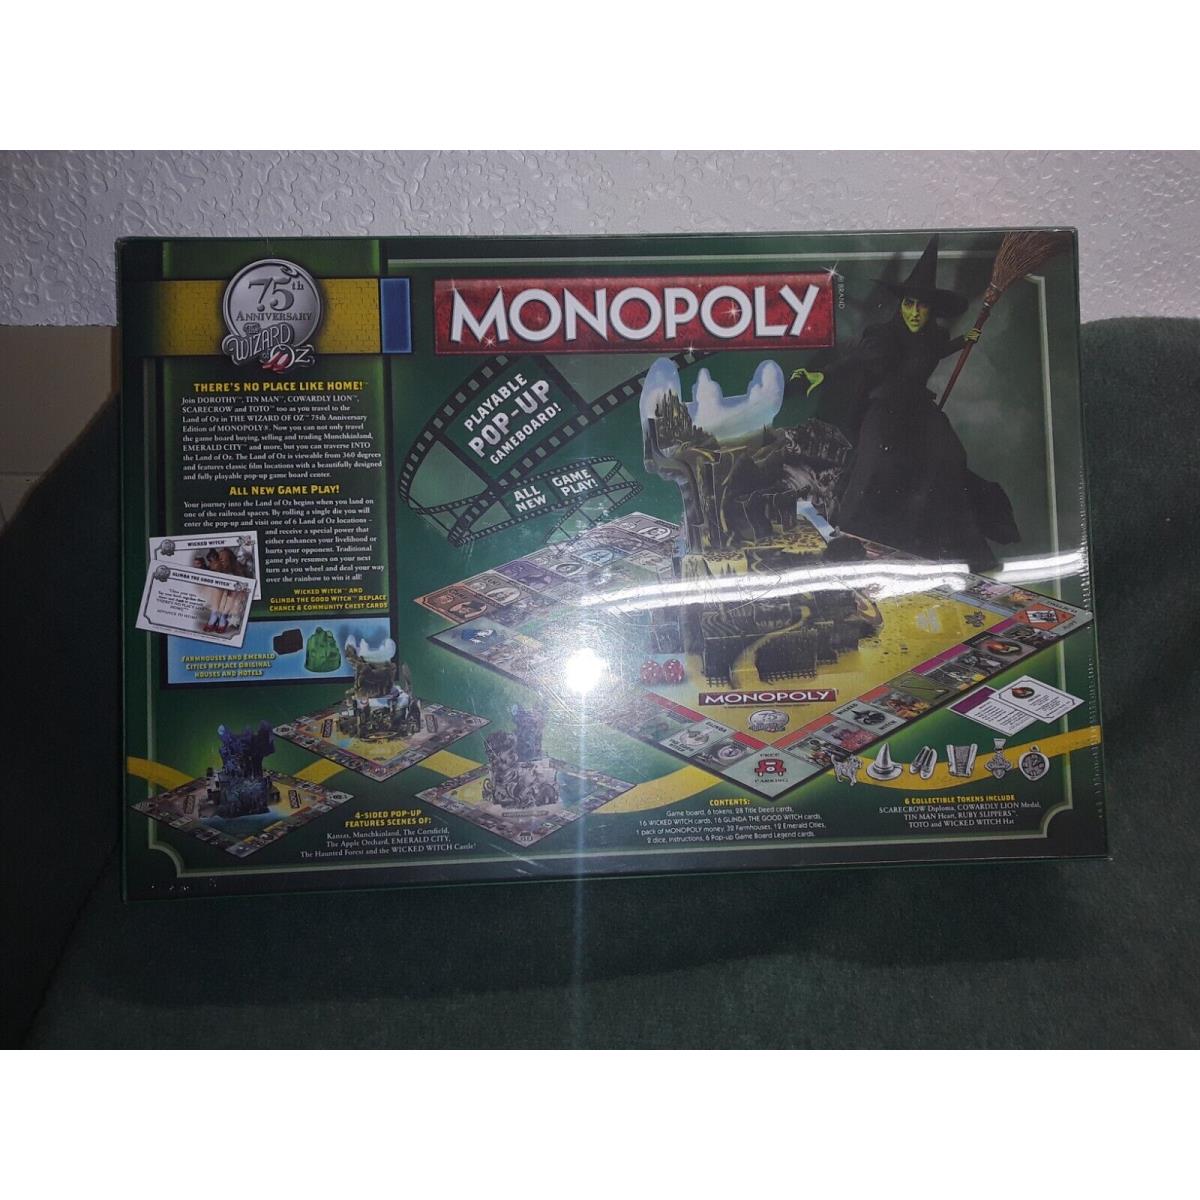 The Wizard of Oz 75th Anniversary Collectors Edition Monopoly